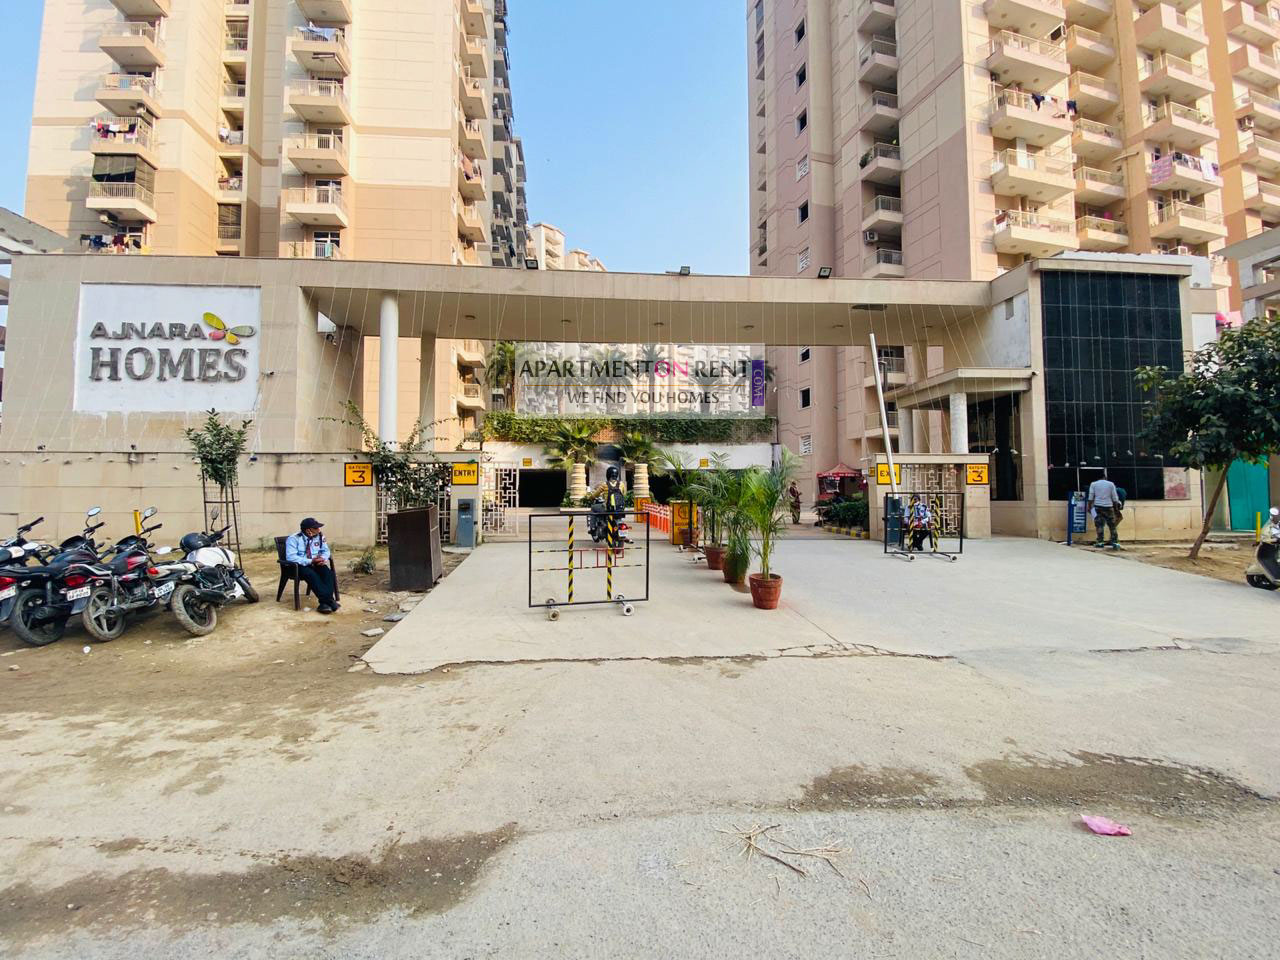 Apartments for Rent In Ajnara Homes